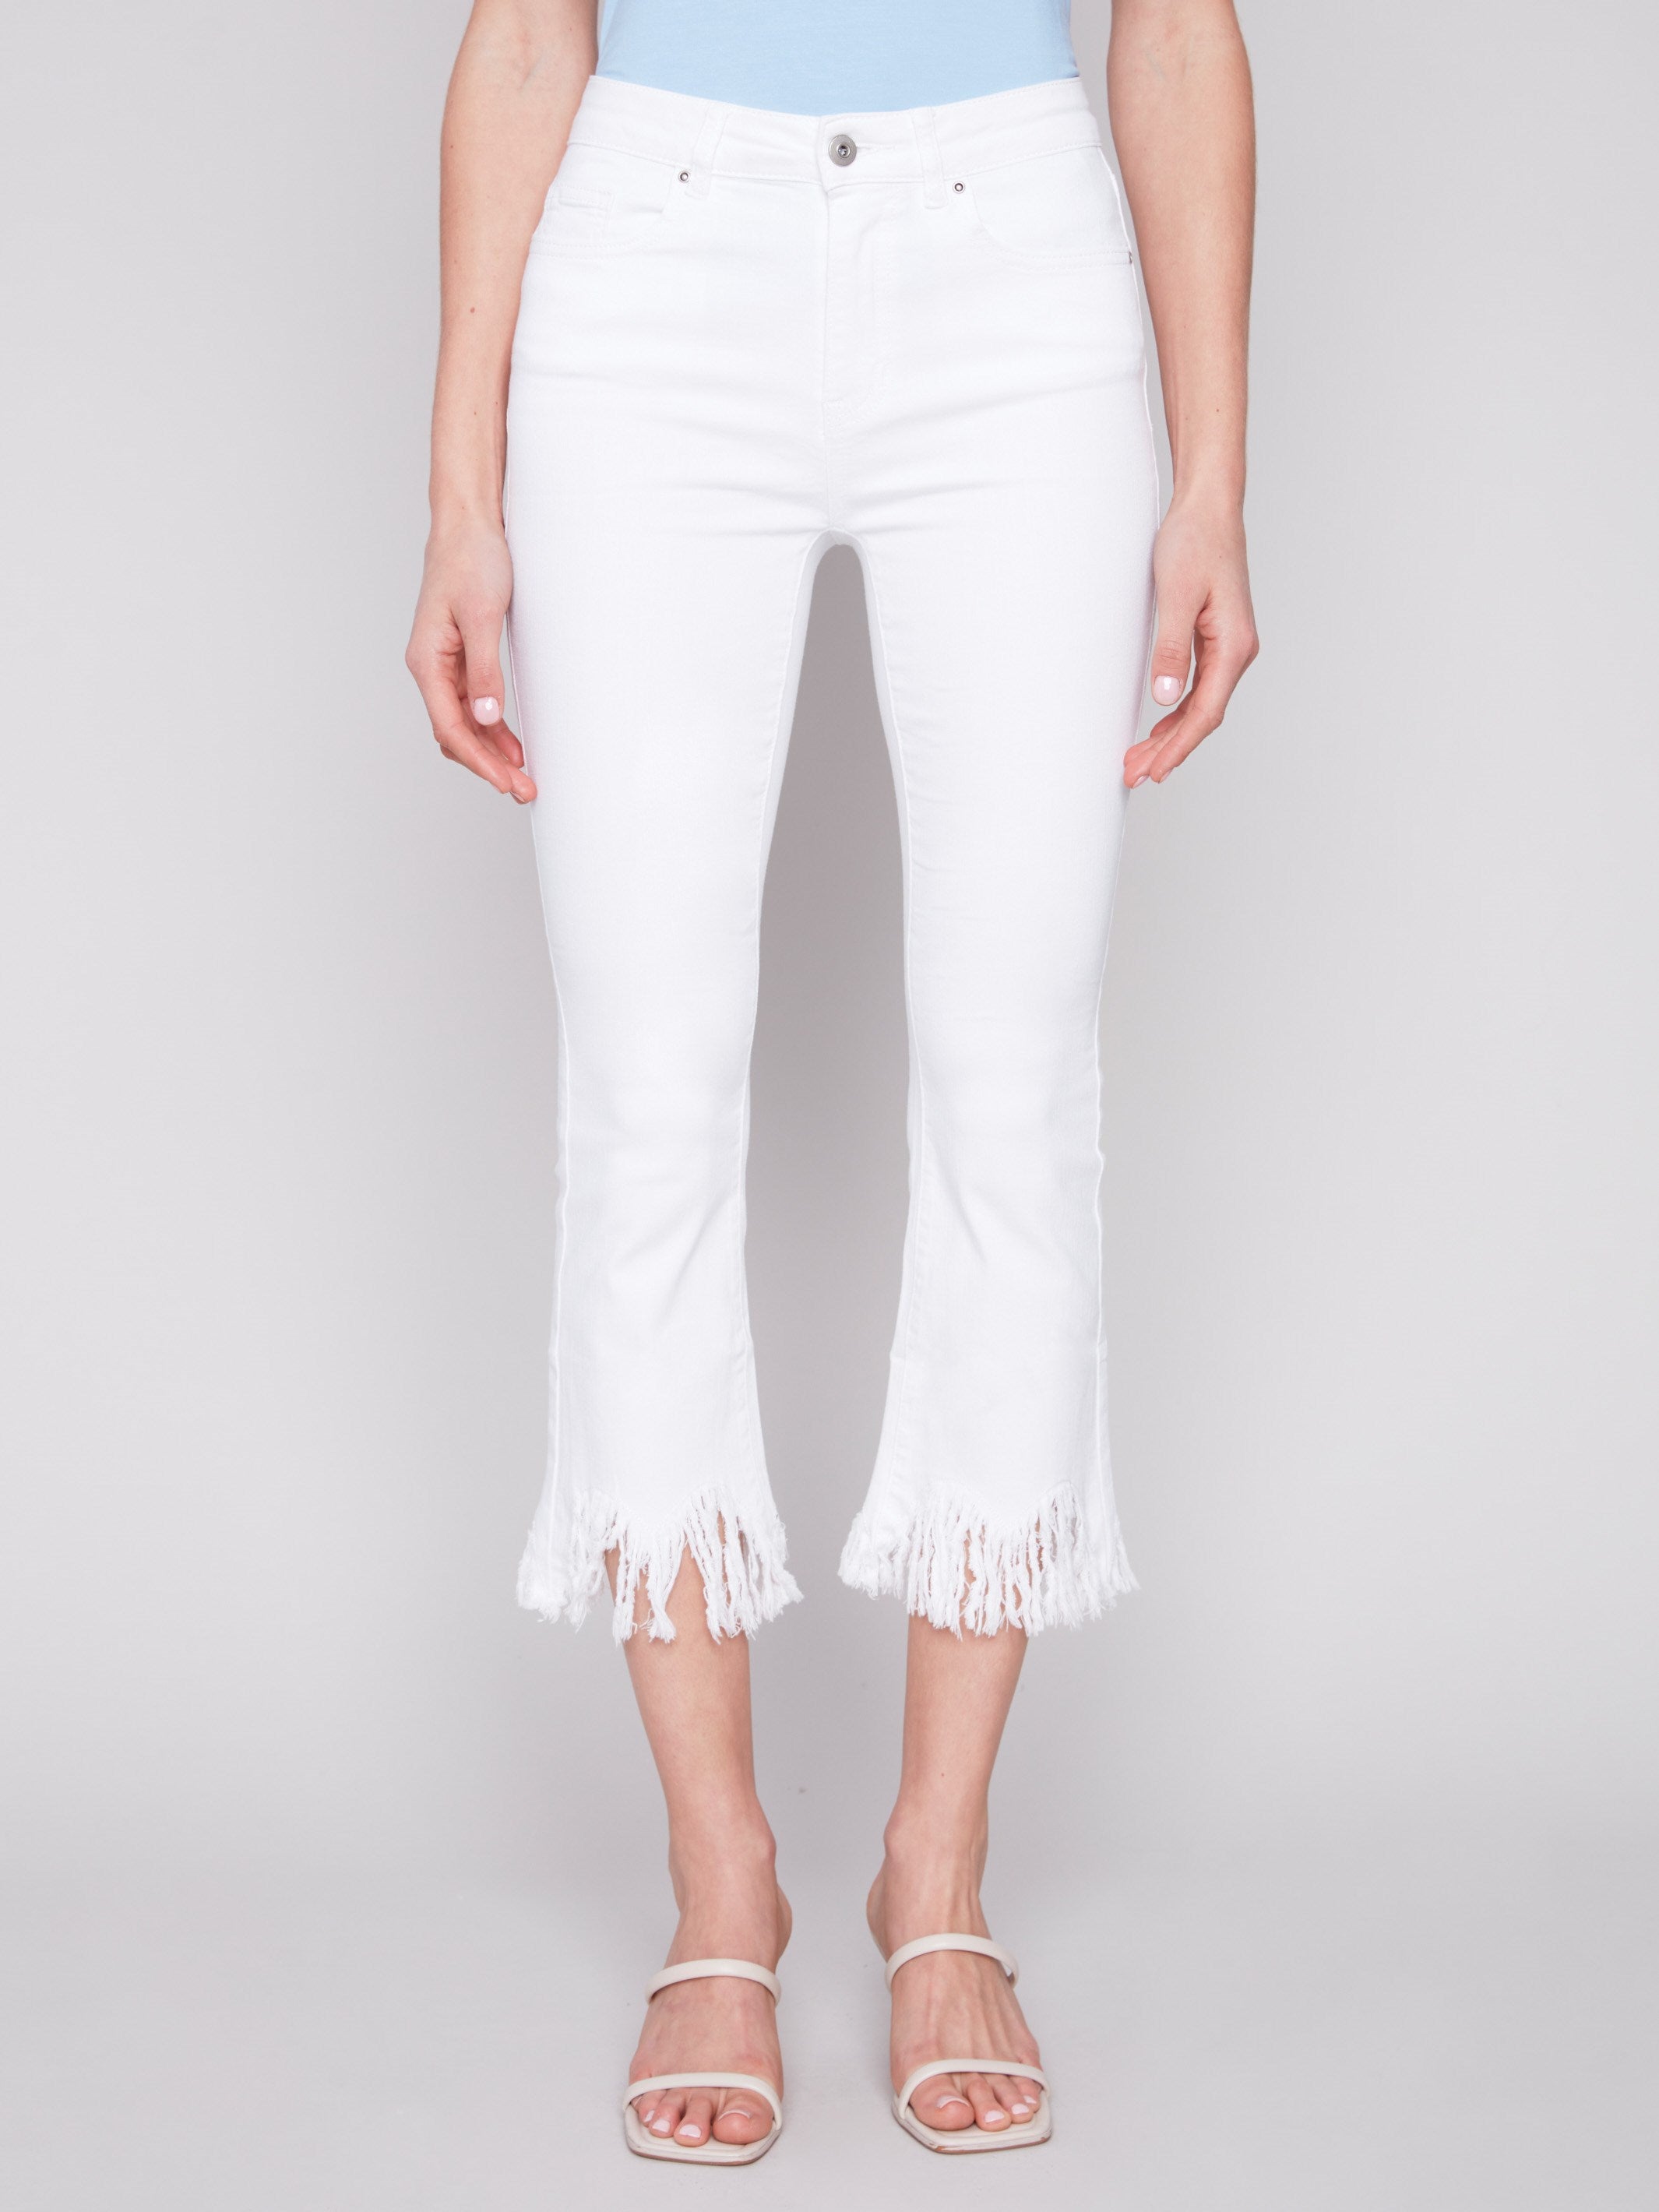 Cropped Twill Jeans with Fringed Hem - White - Charlie B Collection Canada - Image 6